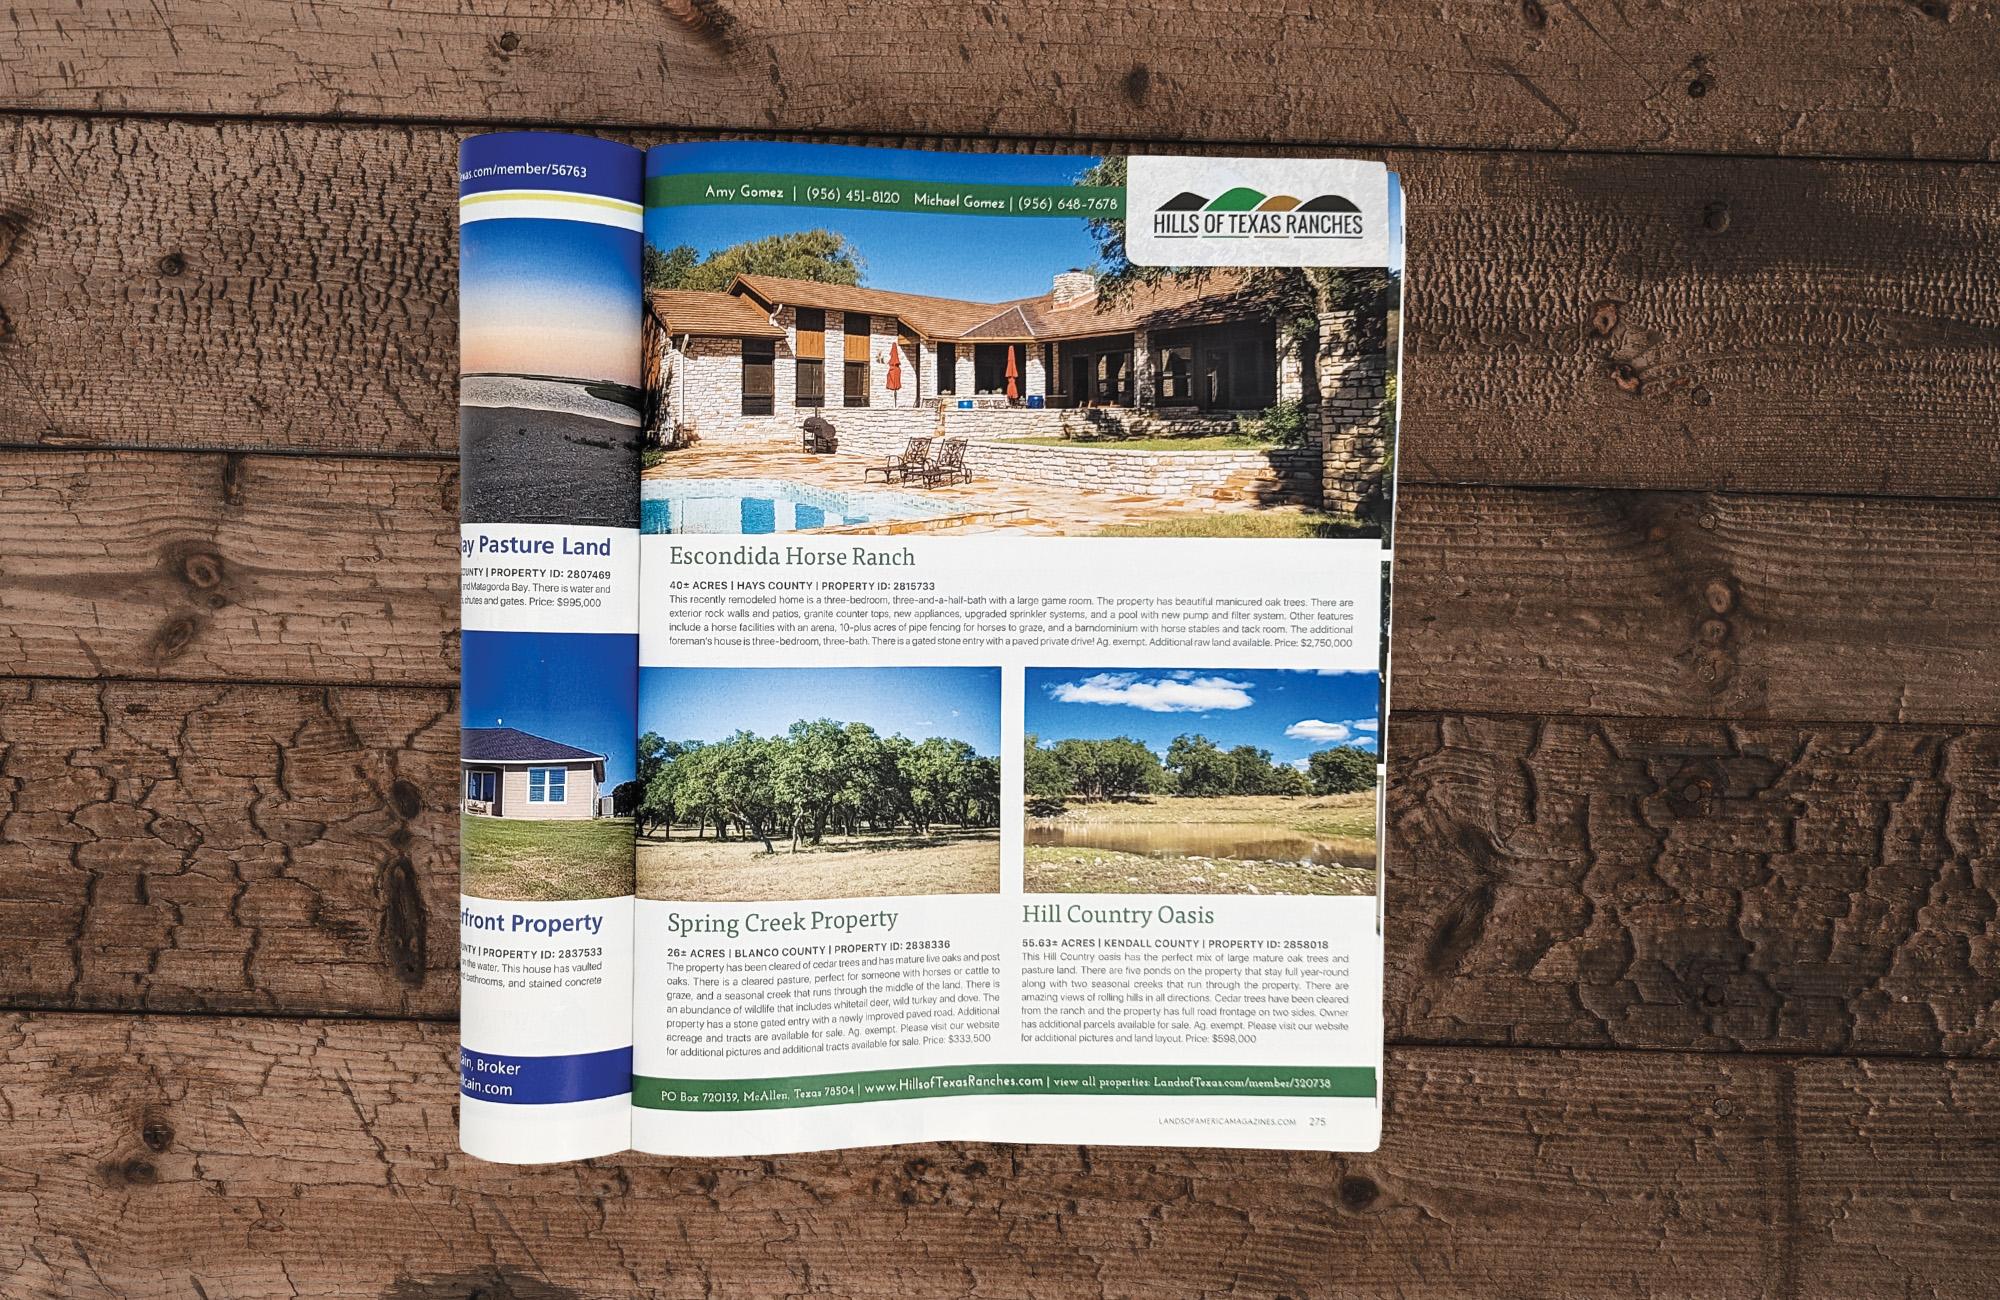 A magazine on a wooden surface. The left side of the magazine is rolled and tucked underneath. The Right side is a property listing page for Hills of Texas Ranches. The top property features a brick house with a pool.